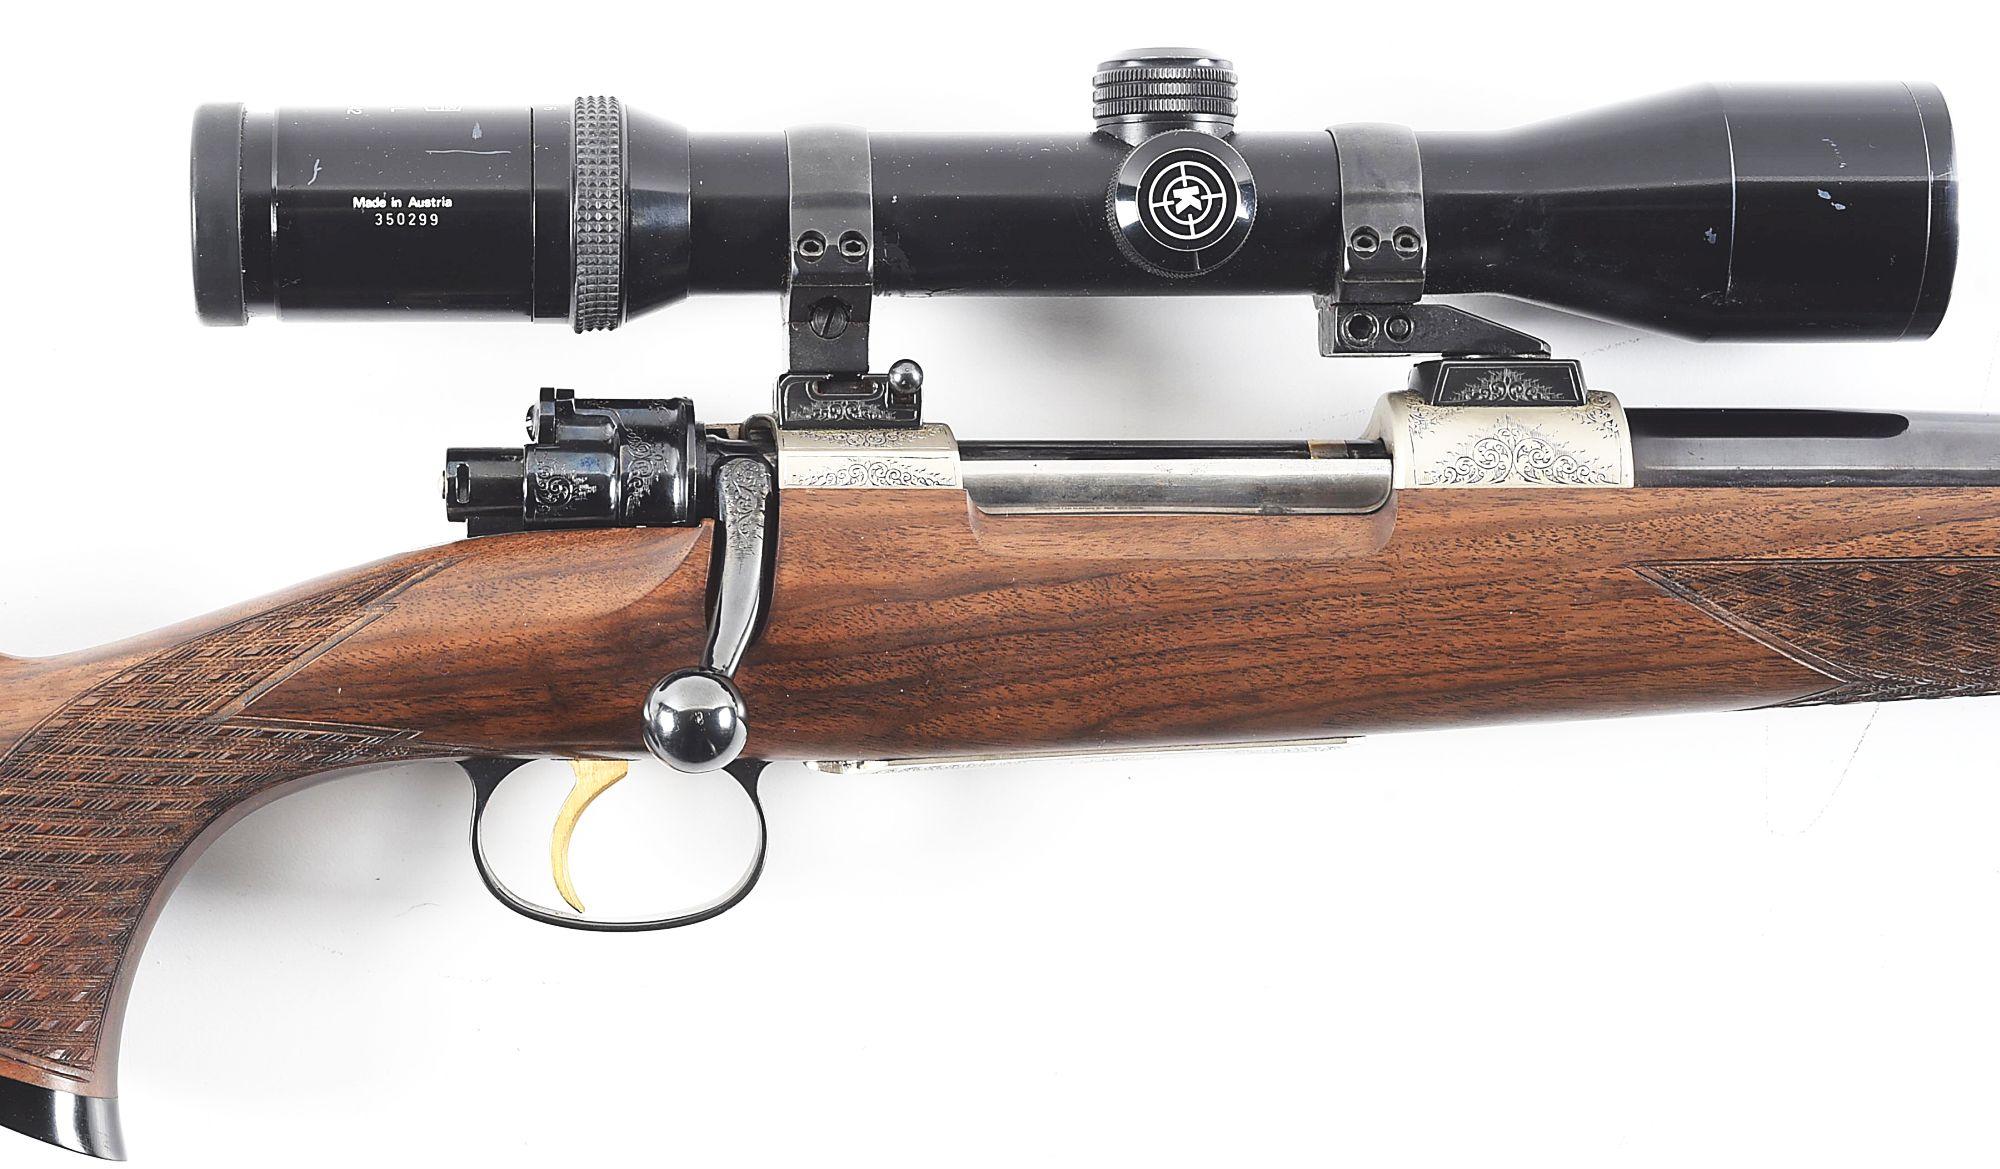 (M) A CUSTOM GERMAN M98 BOLT ACTION RIFLE IN .358 NORMA MAGNUM.